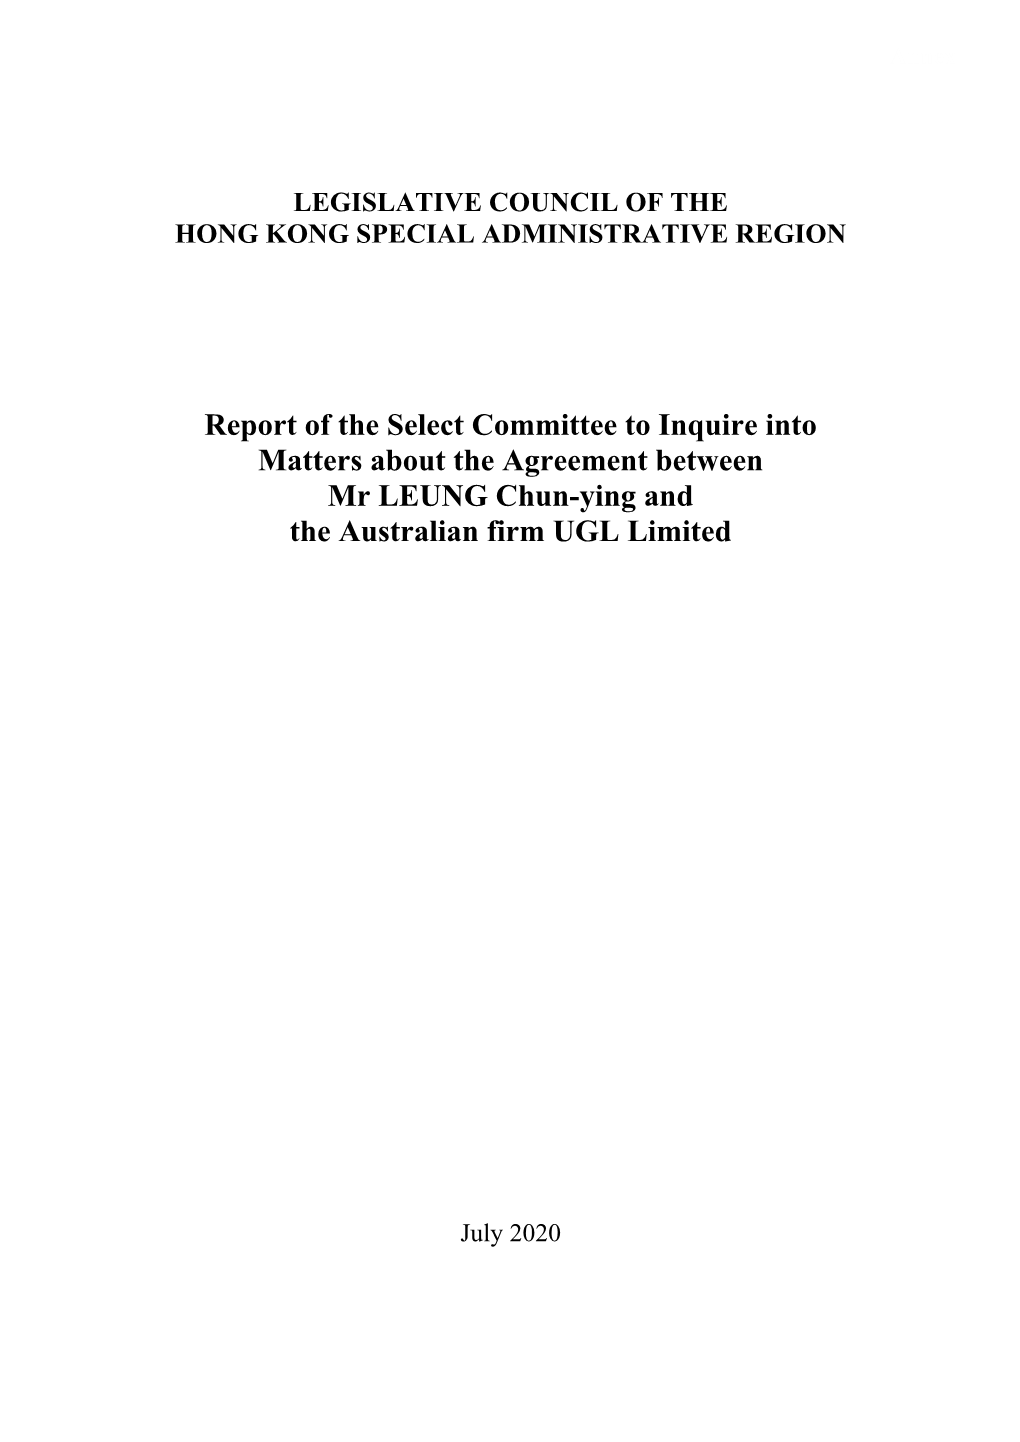 Report of the Select Committee to Inquire Into Matters About the Agreement Between Mr LEUNG Chun-Ying and the Australian Firm UGL Limited